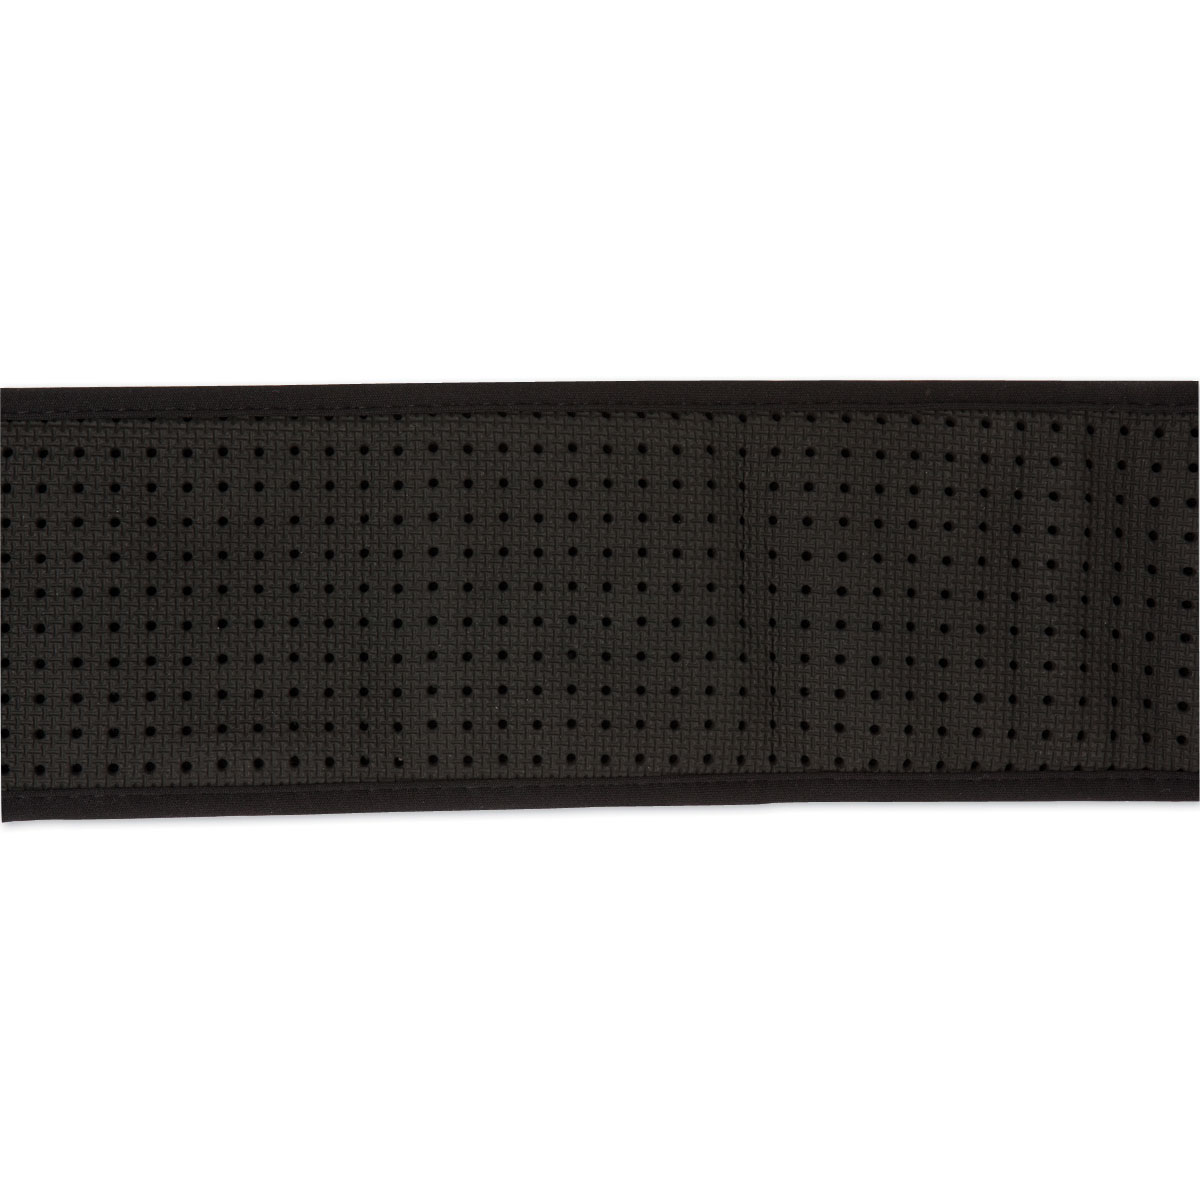 Lami-Cell Neoprene Girth with Elastic End